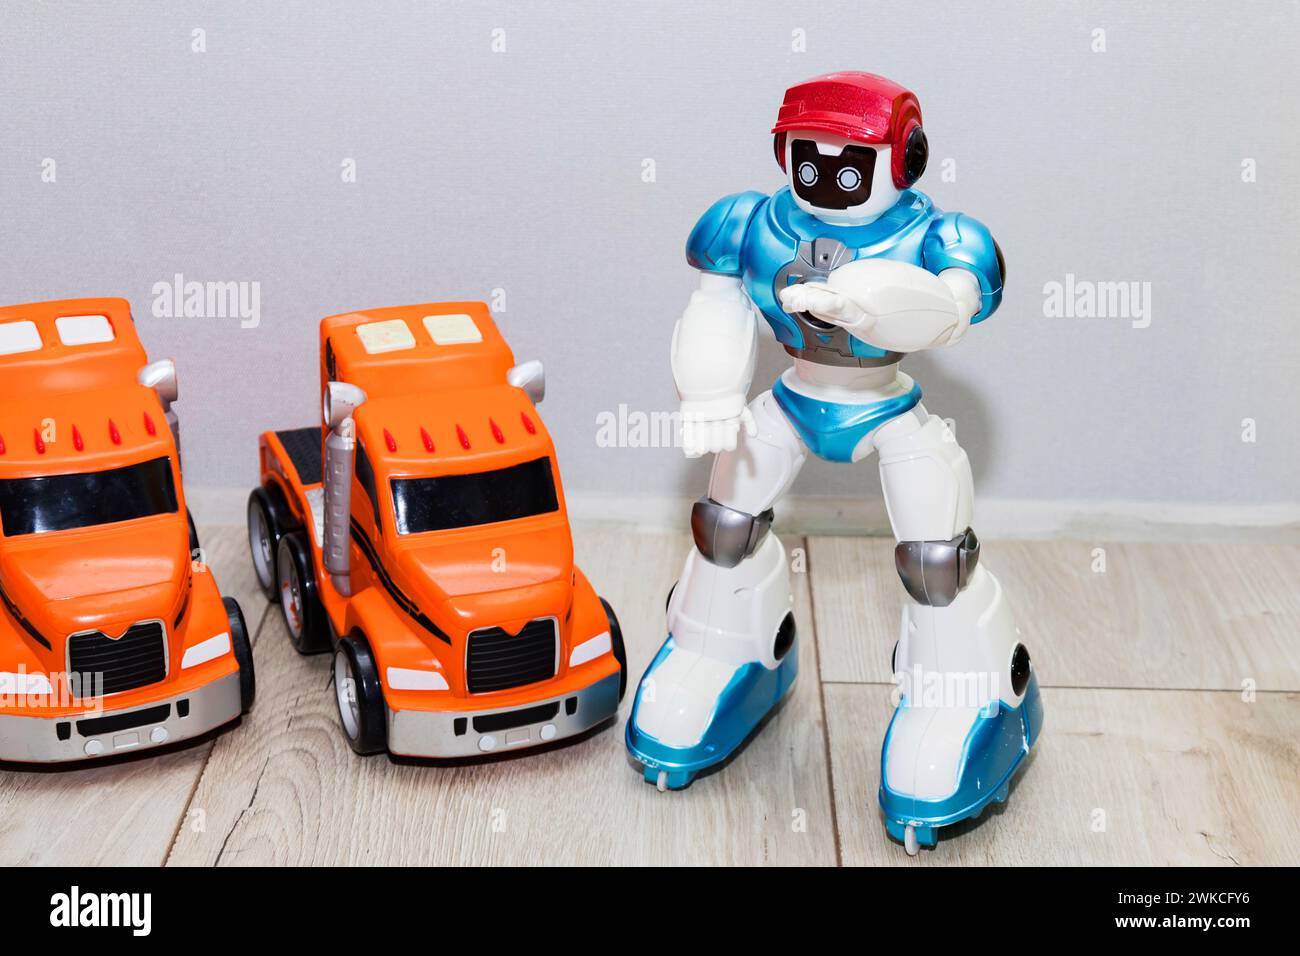 on the floor there are children's toy cars made of plastic and a robot. Stock Photo